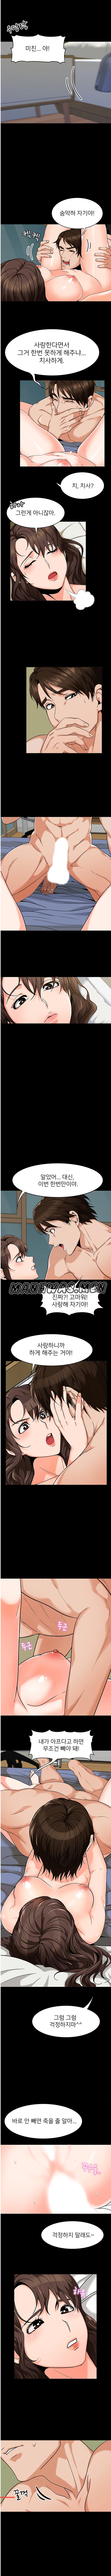 Oppa, Not There Raw - Chapter 1 Page 2